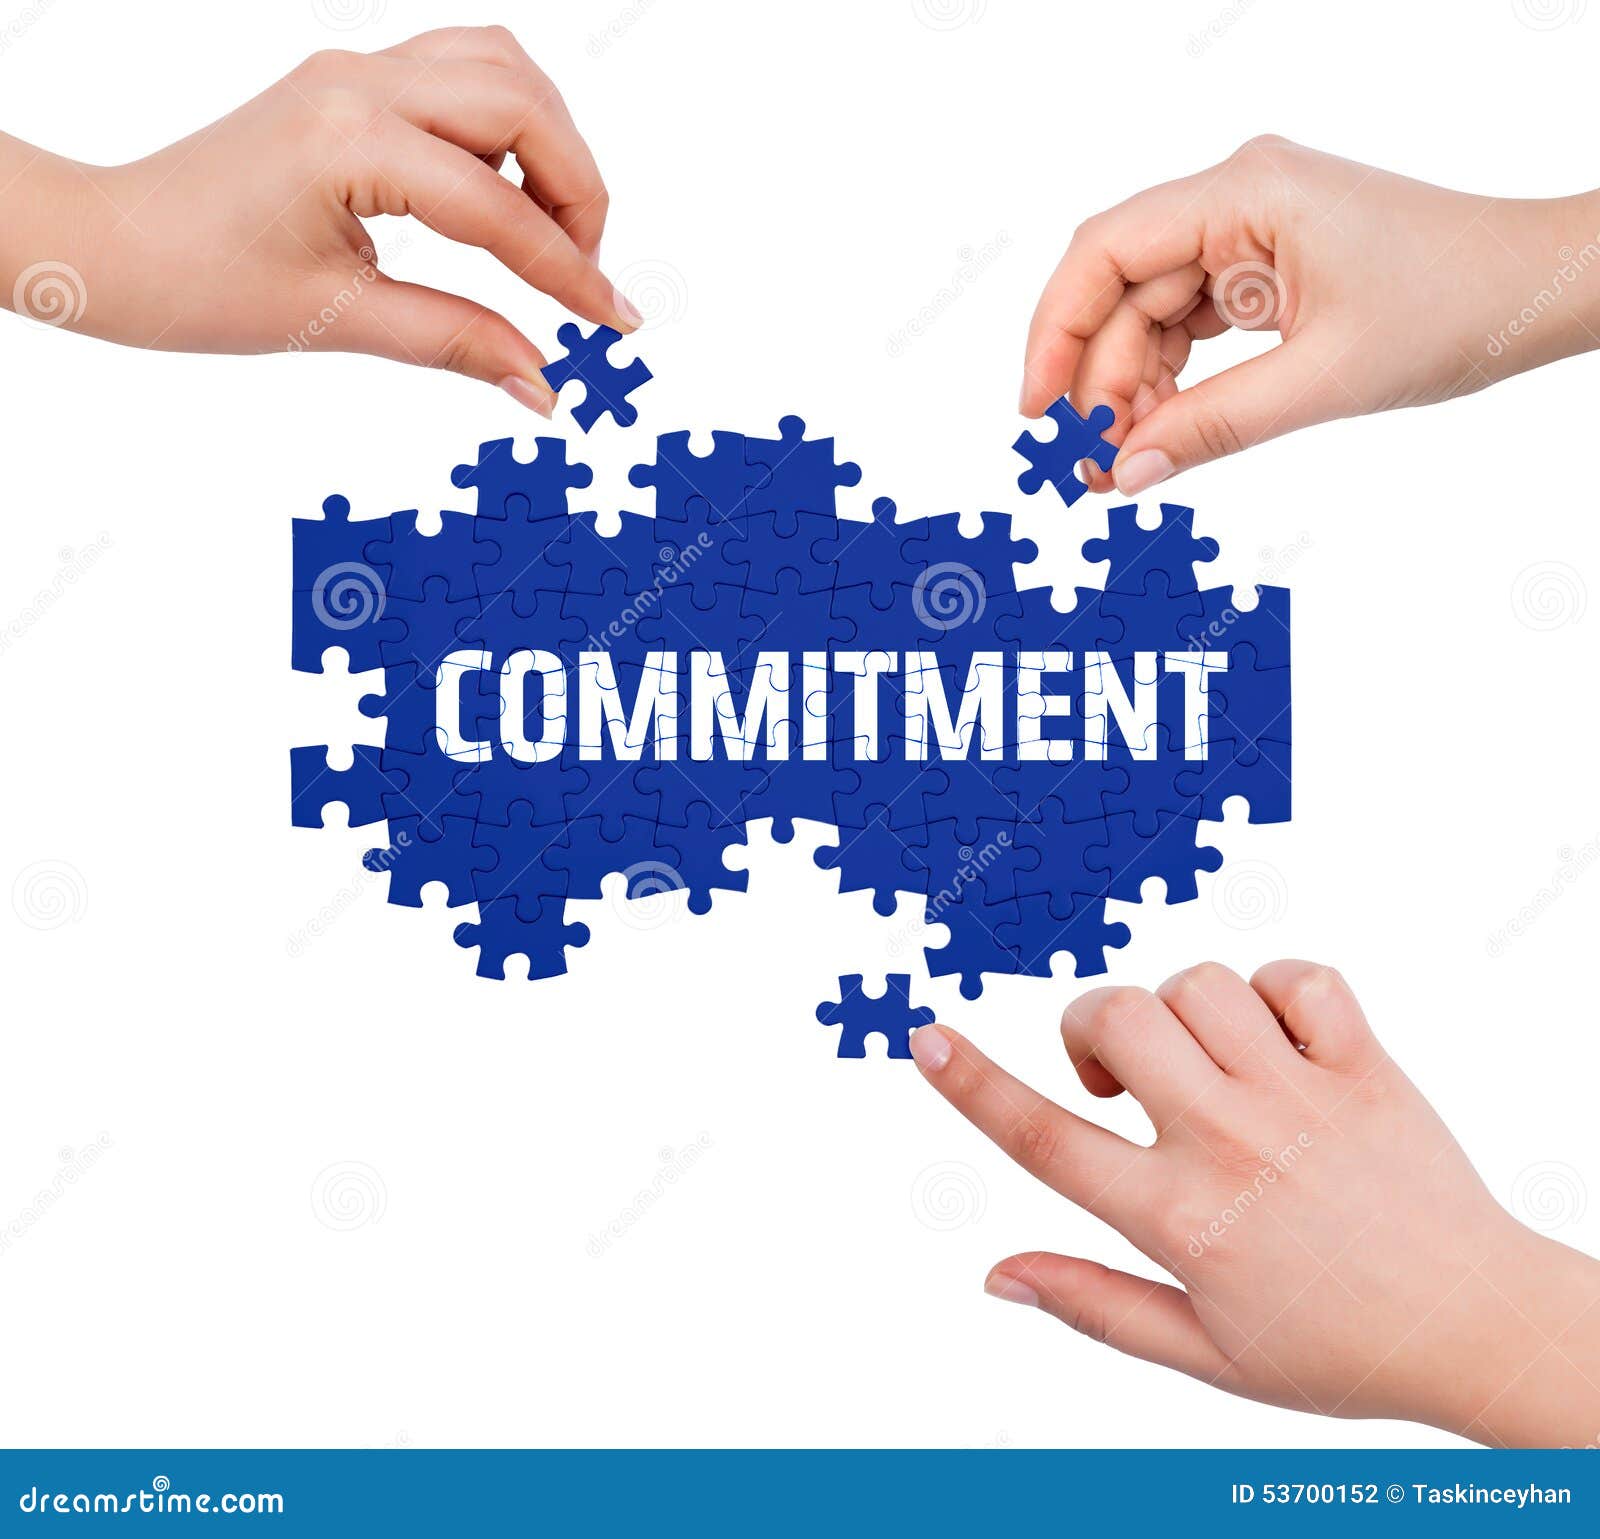 Video: pronunciation of 'commitment'